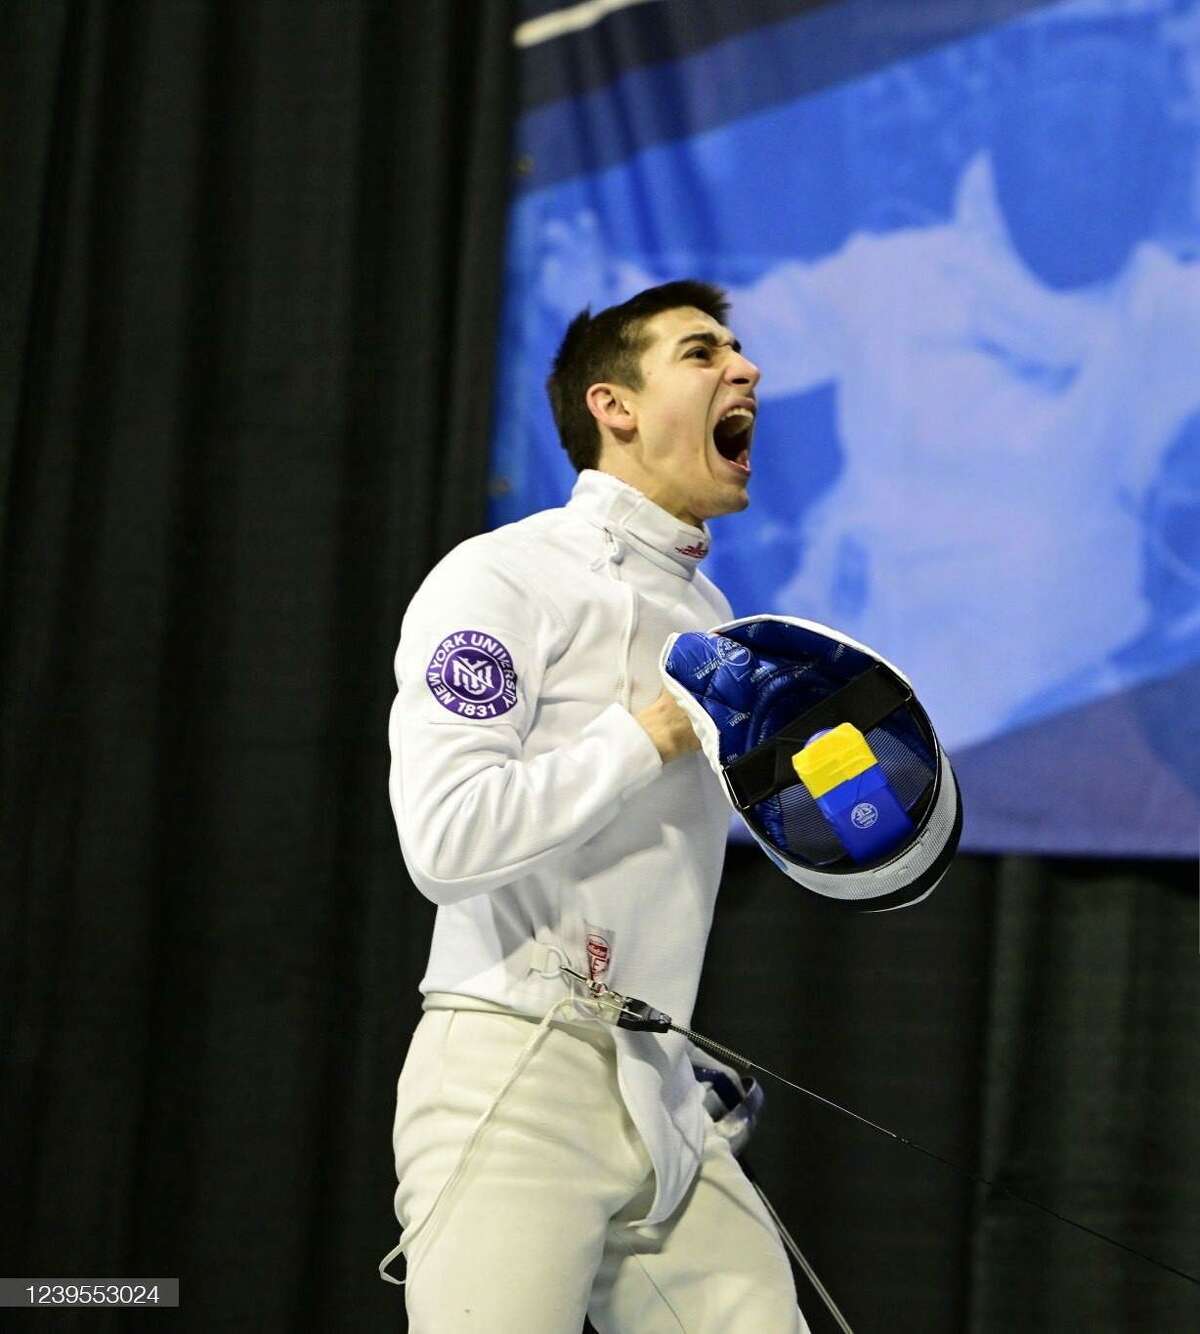 Ian Sanders showing emotion after securing a bronze medal at the 2022 NCAA Fencing Championships